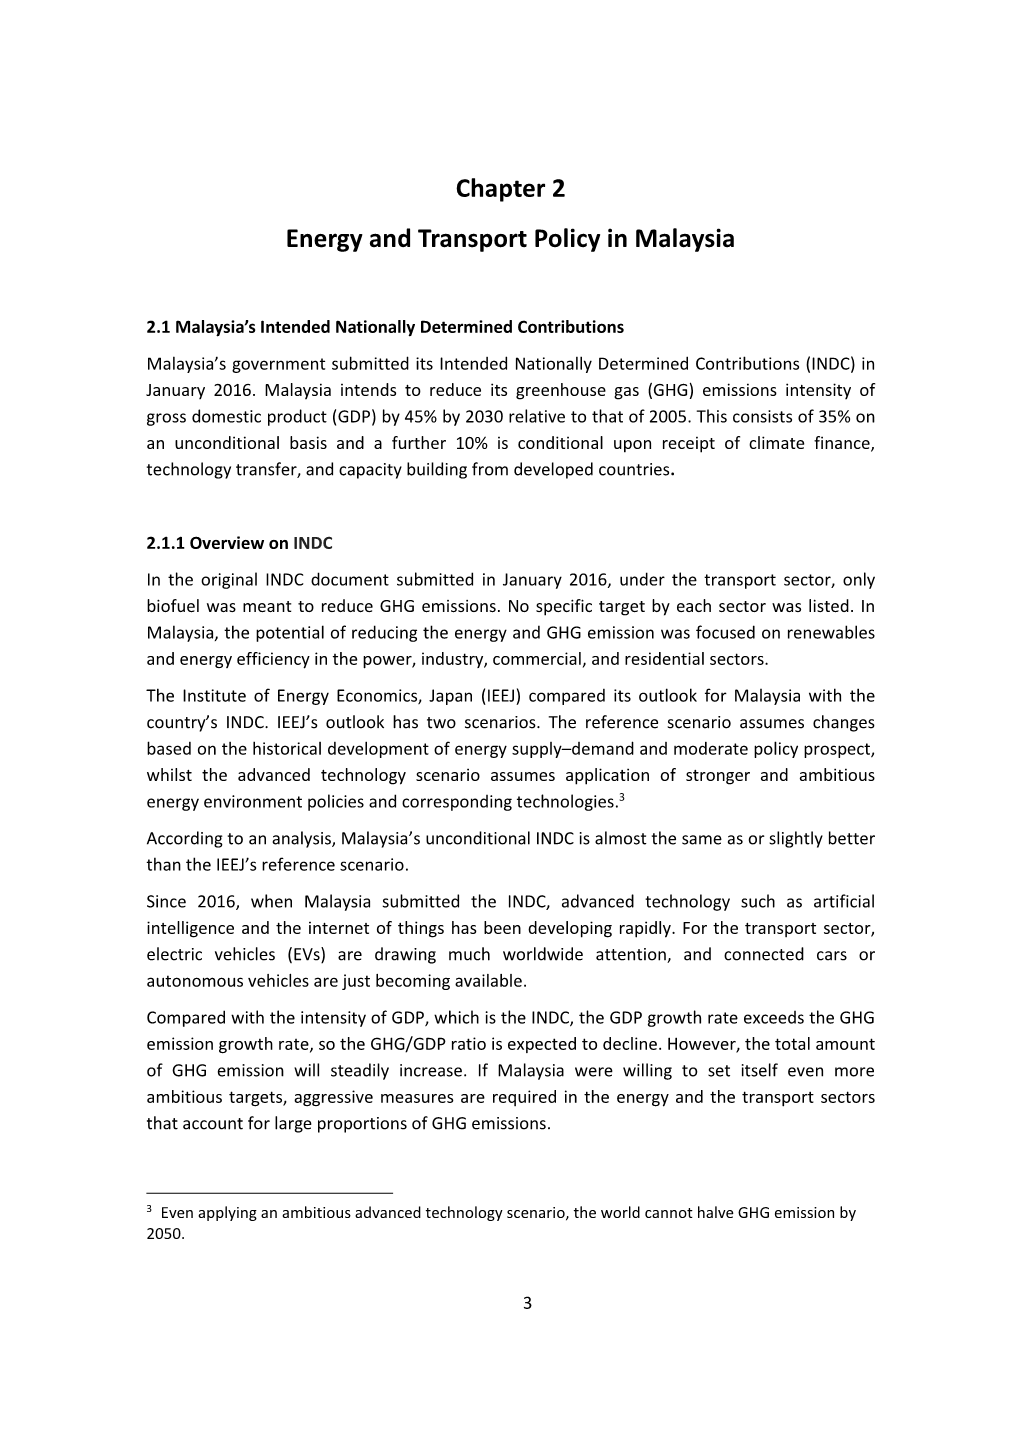 Chapter 2. Energy and Transport Policy in Malaysia